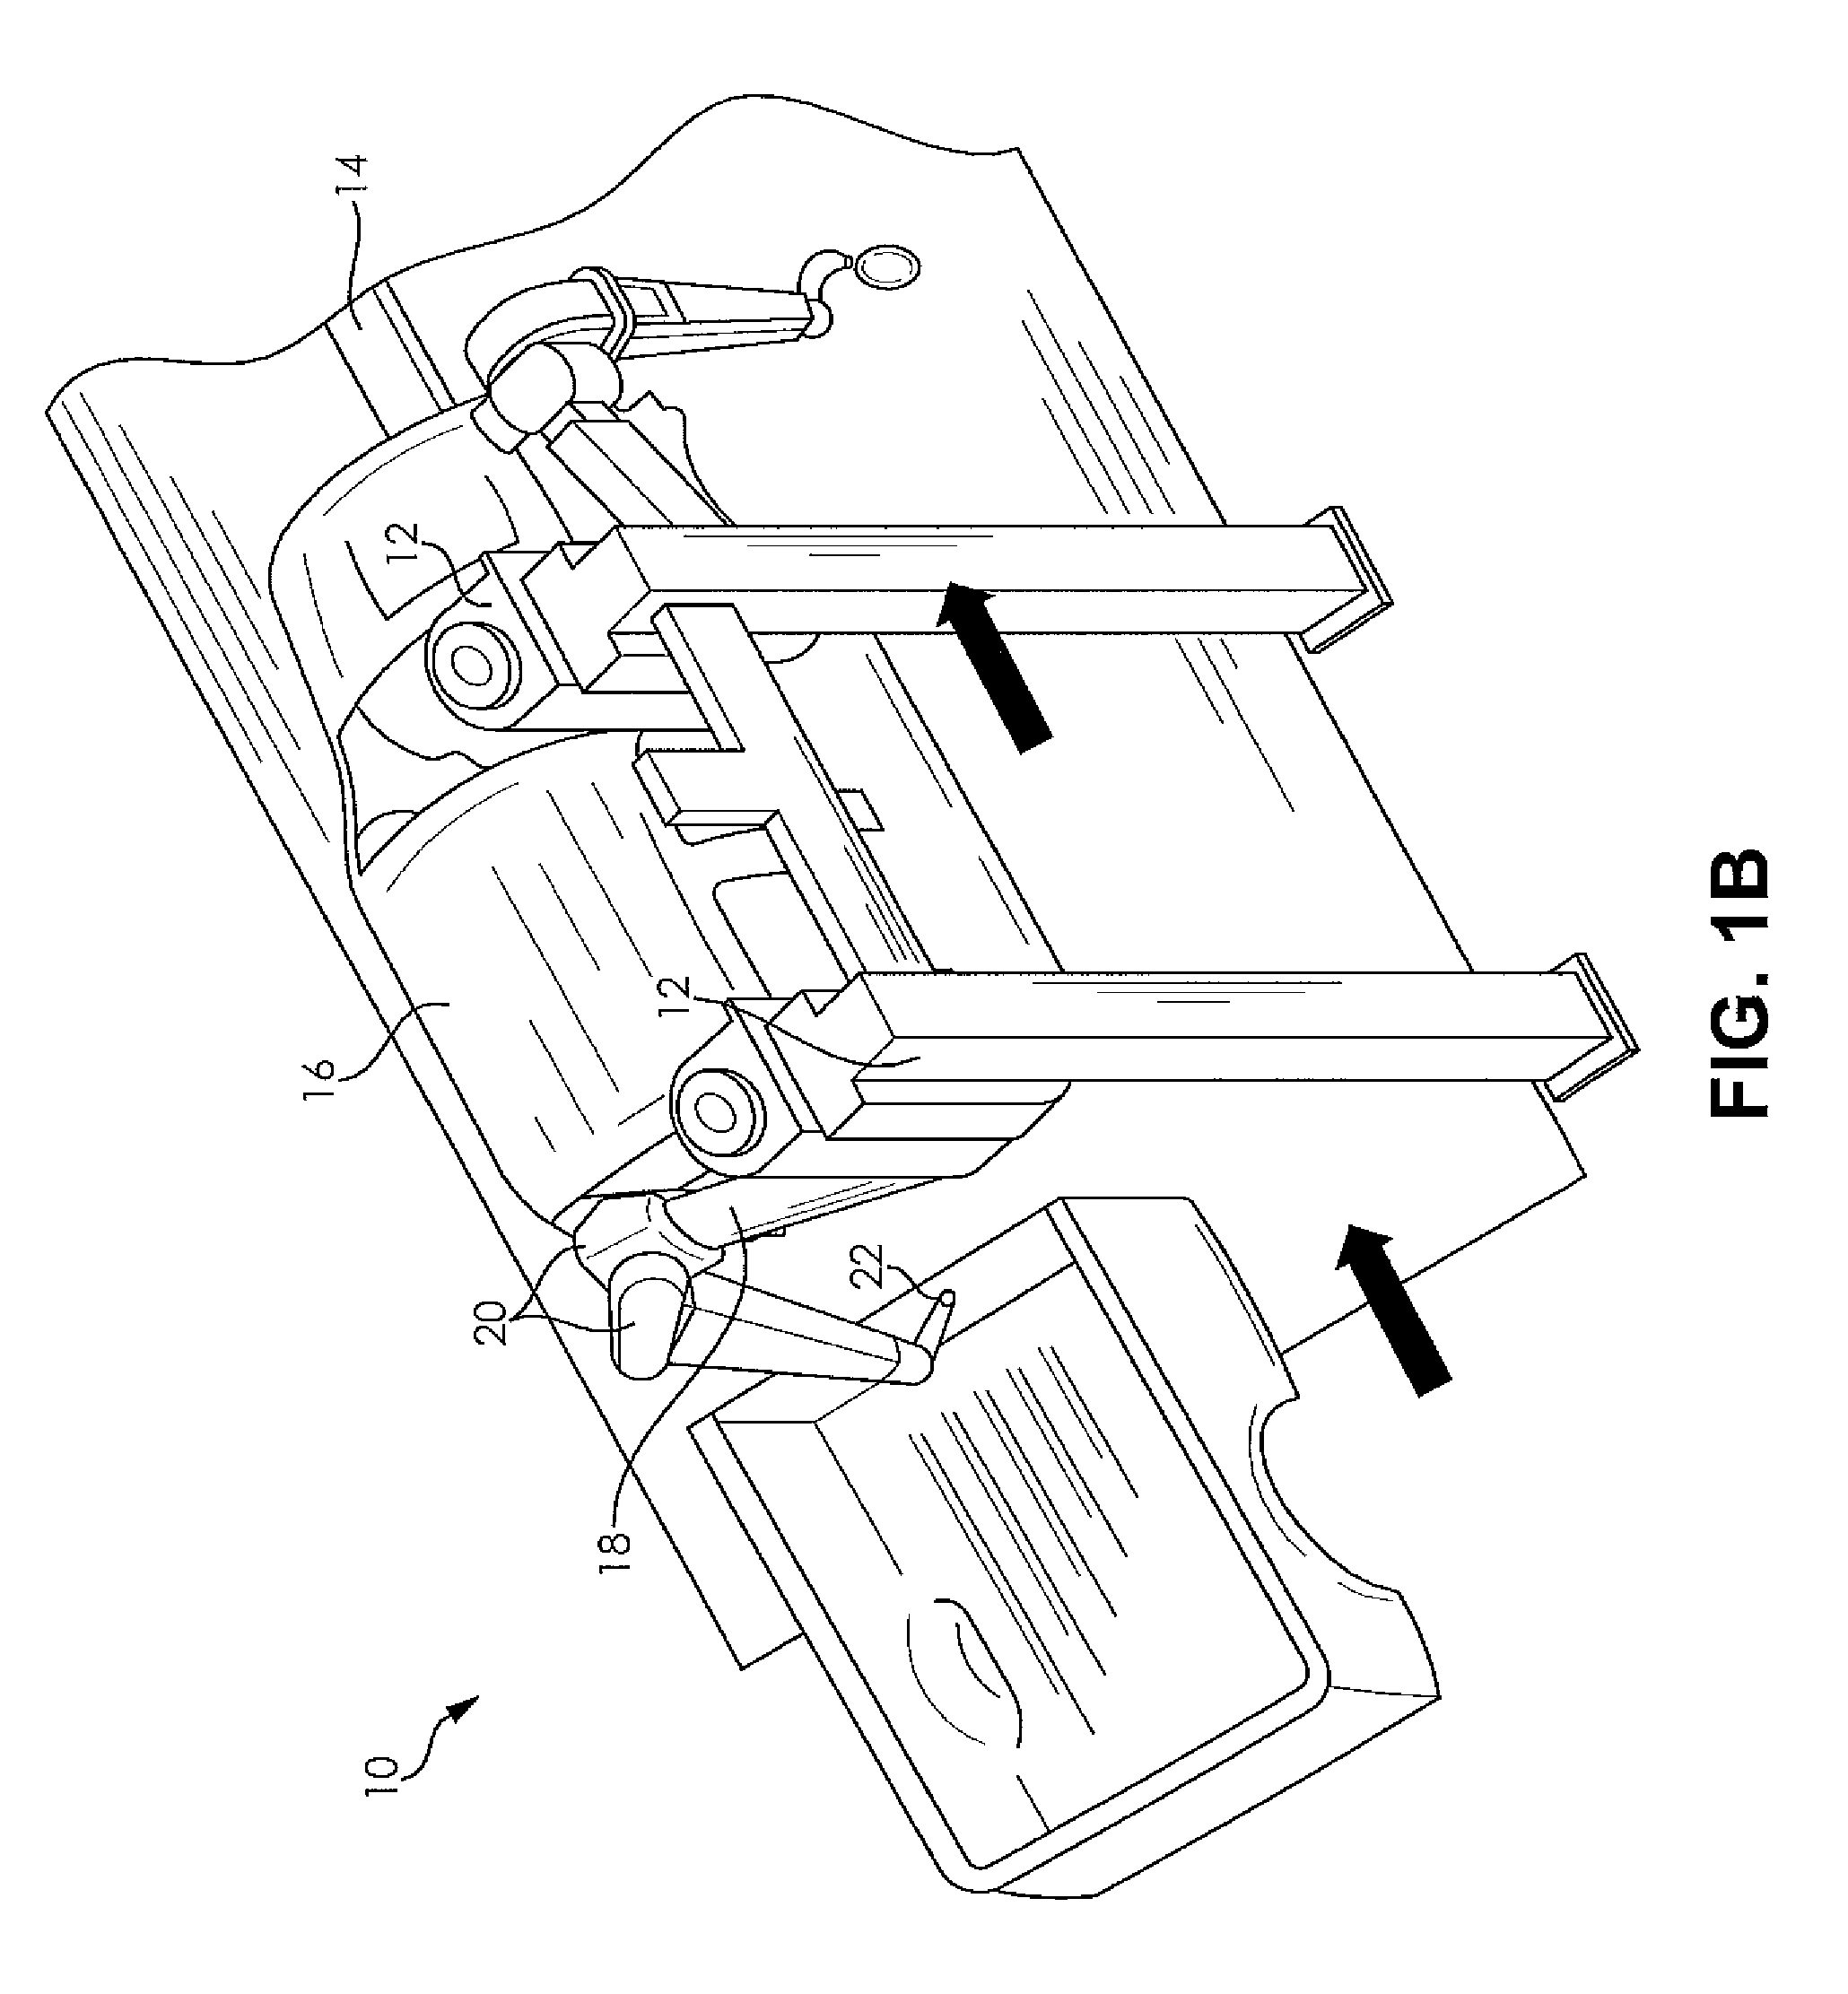 System and method for enhancing a visualization of coordinate points within a robots working envelope